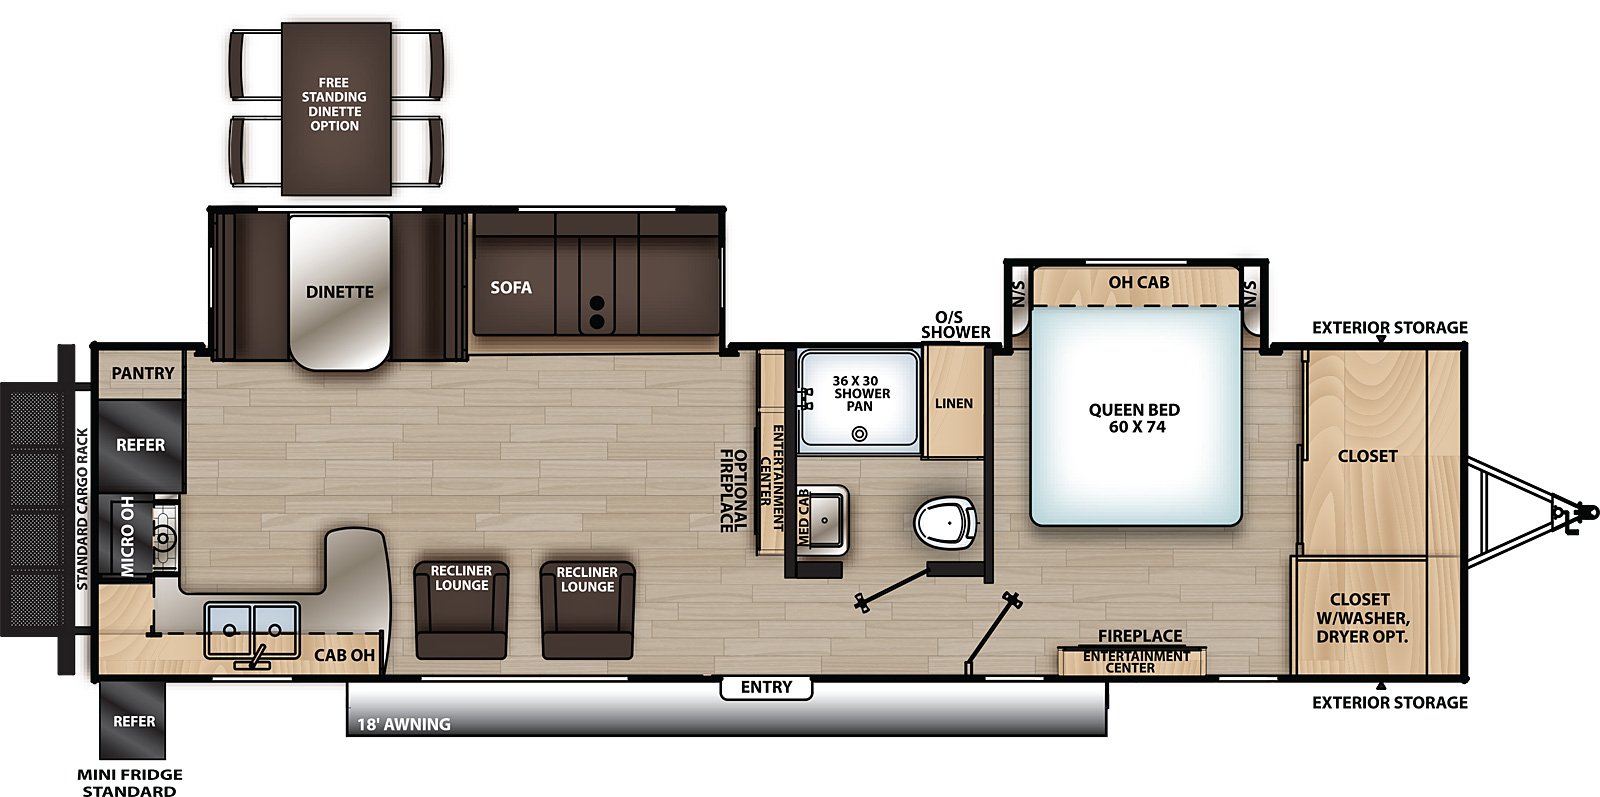 The 303RKDS has two slide outs on the off-door side and one entry door on the door side. Interior layout from front to back: front bedroom with closet, off-door side slide out containing side facing queen bed and overhead cabinet, and door side entertainment center; off-door side bathroom; entertainment center; kitchen living dining area with off-door side slide out containing sofa and dinette; door side recliners with overhead cabinet; and door side kitchen containing double basin sink, overhead cabinet, cook top stove, microwave cabinet, refrigerator, and pantry.